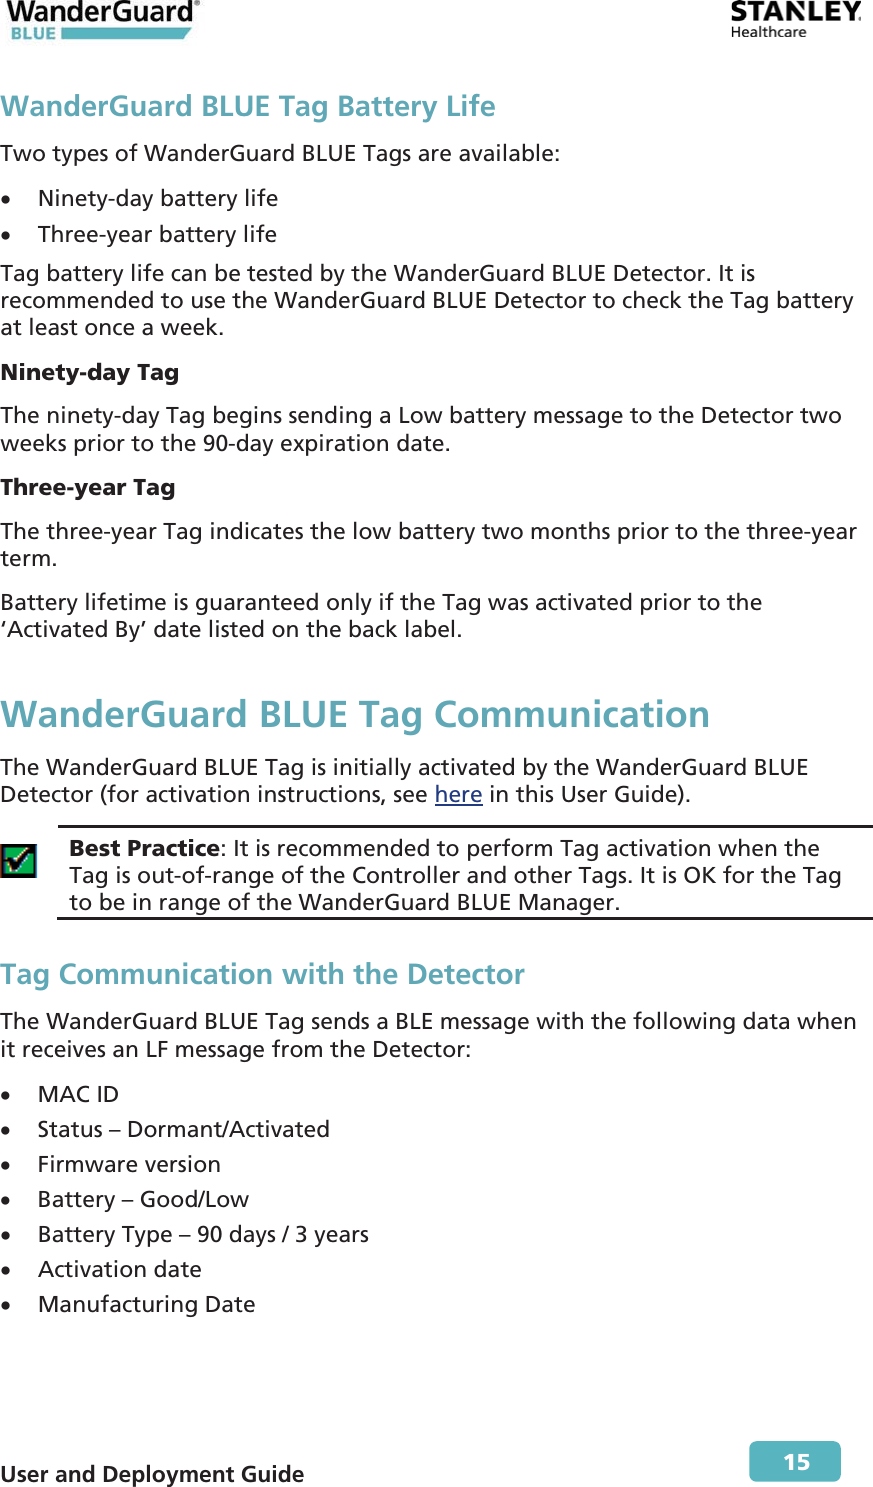  User and Deployment Guide        15 WanderGuard BLUE Tag Battery Life Two types of WanderGuard BLUE Tags are available:  x Ninety-day battery life  x Three-year battery life Tag battery life can be tested by the WanderGuard BLUE Detector. It is recommended to use the WanderGuard BLUE Detector to check the Tag battery at least once a week. Ninety-day Tag The ninety-day Tag begins sending a Low battery message to the Detector two weeks prior to the 90-day expiration date. Three-year Tag The three-year Tag indicates the low battery two months prior to the three-year term. Battery lifetime is guaranteed only if the Tag was activated prior to the ‘Activated By’ date listed on the back label. WanderGuard BLUE Tag Communication The WanderGuard BLUE Tag is initially activated by the WanderGuard BLUE Detector (for activation instructions, see here in this User Guide).  Best Practice: It is recommended to perform Tag activation when the Tag is out-of-range of the Controller and other Tags. It is OK for the Tag to be in range of the WanderGuard BLUE Manager. Tag Communication with the Detector The WanderGuard BLUE Tag sends a BLE message with the following data when it receives an LF message from the Detector: x MAC ID x Status – Dormant/Activated x Firmware version x Battery – Good/Low x Battery Type – 90 days / 3 years x Activation date x Manufacturing Date 